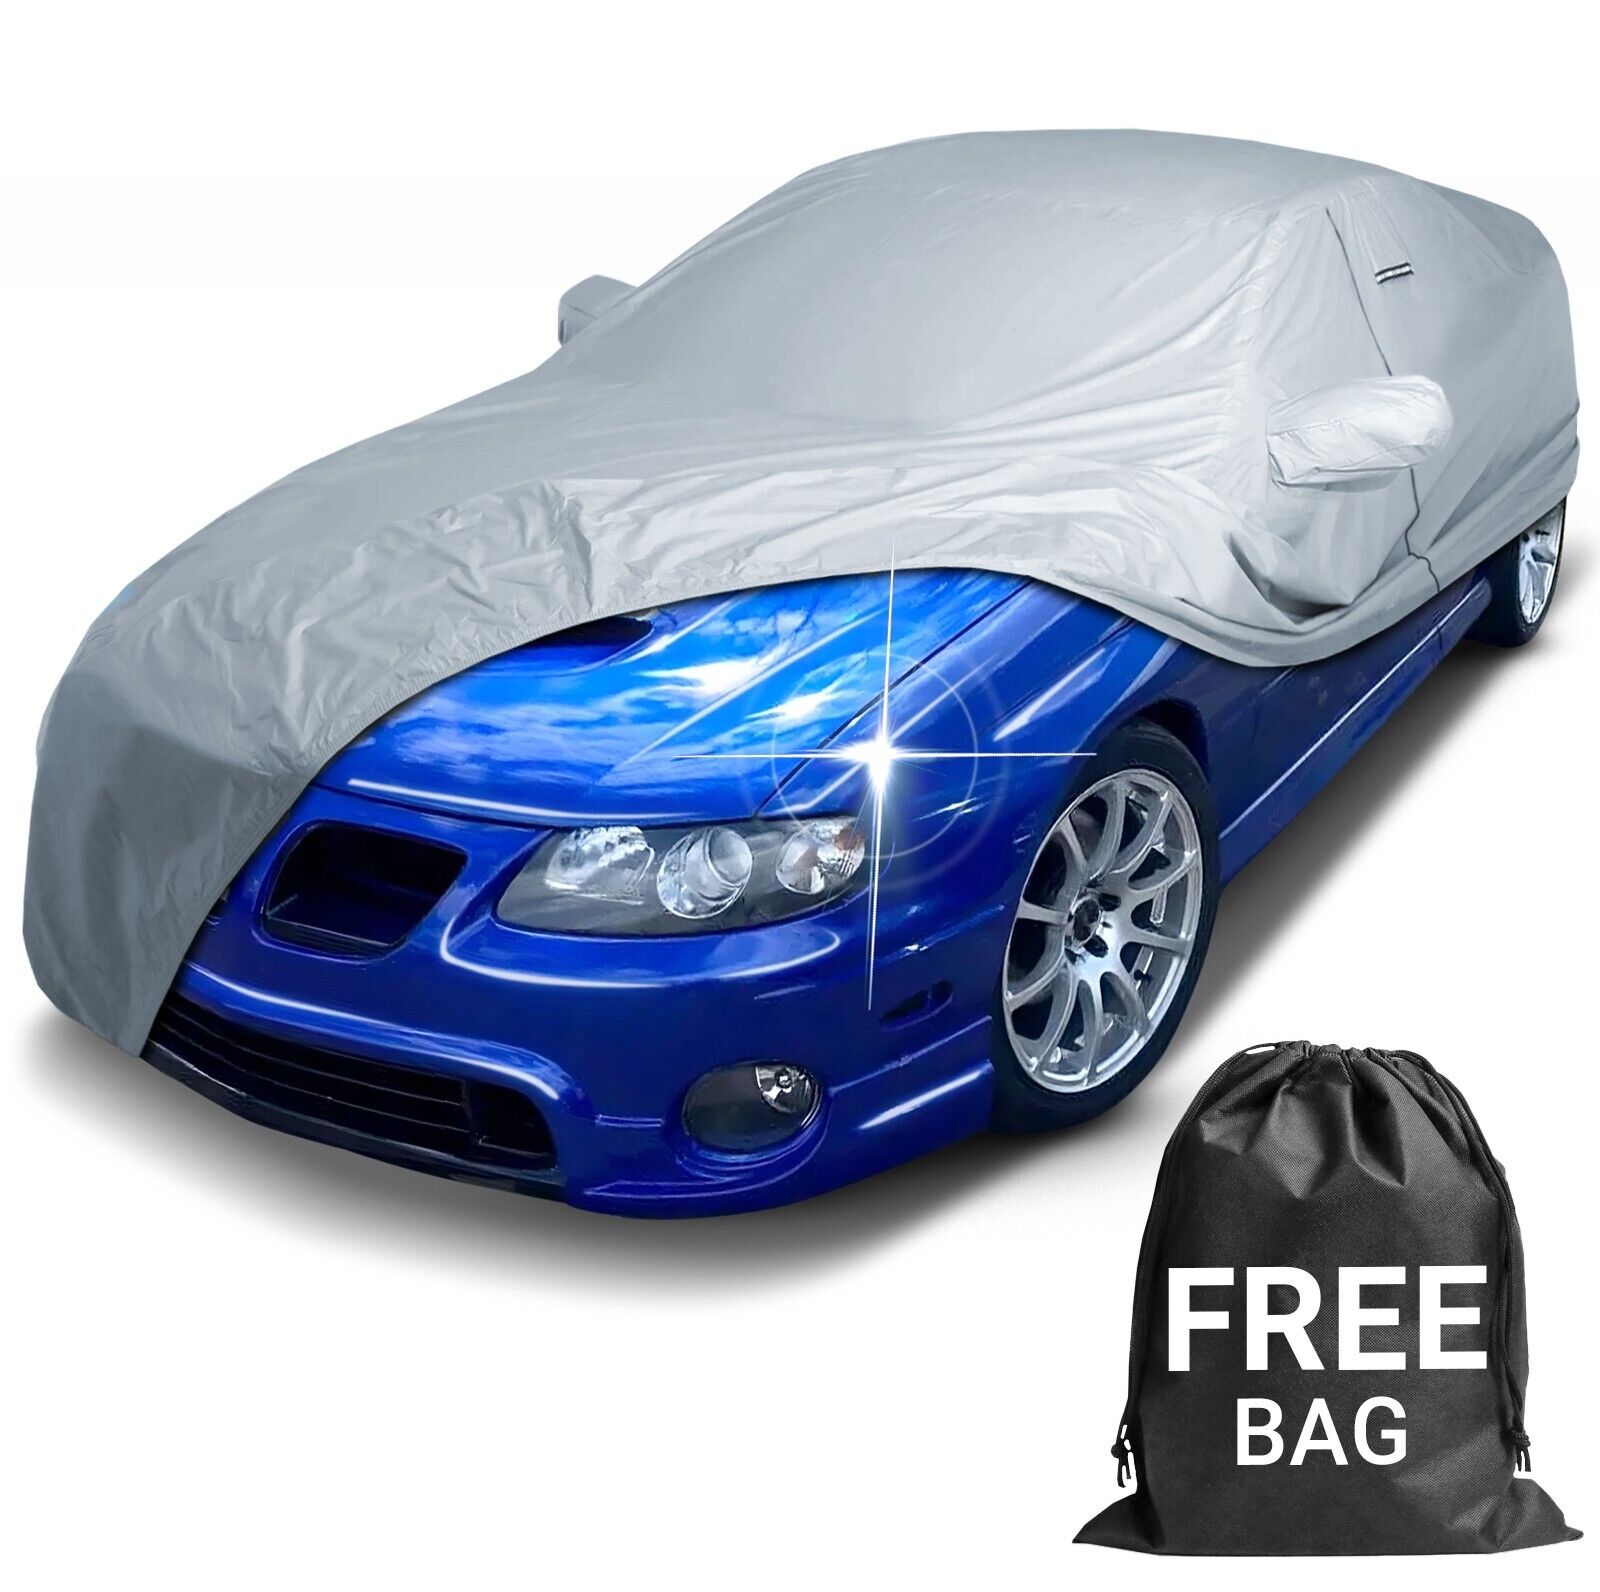 2004-2006 Pontiac GTO Custom Car Cover - All-Weather Waterproof Protection